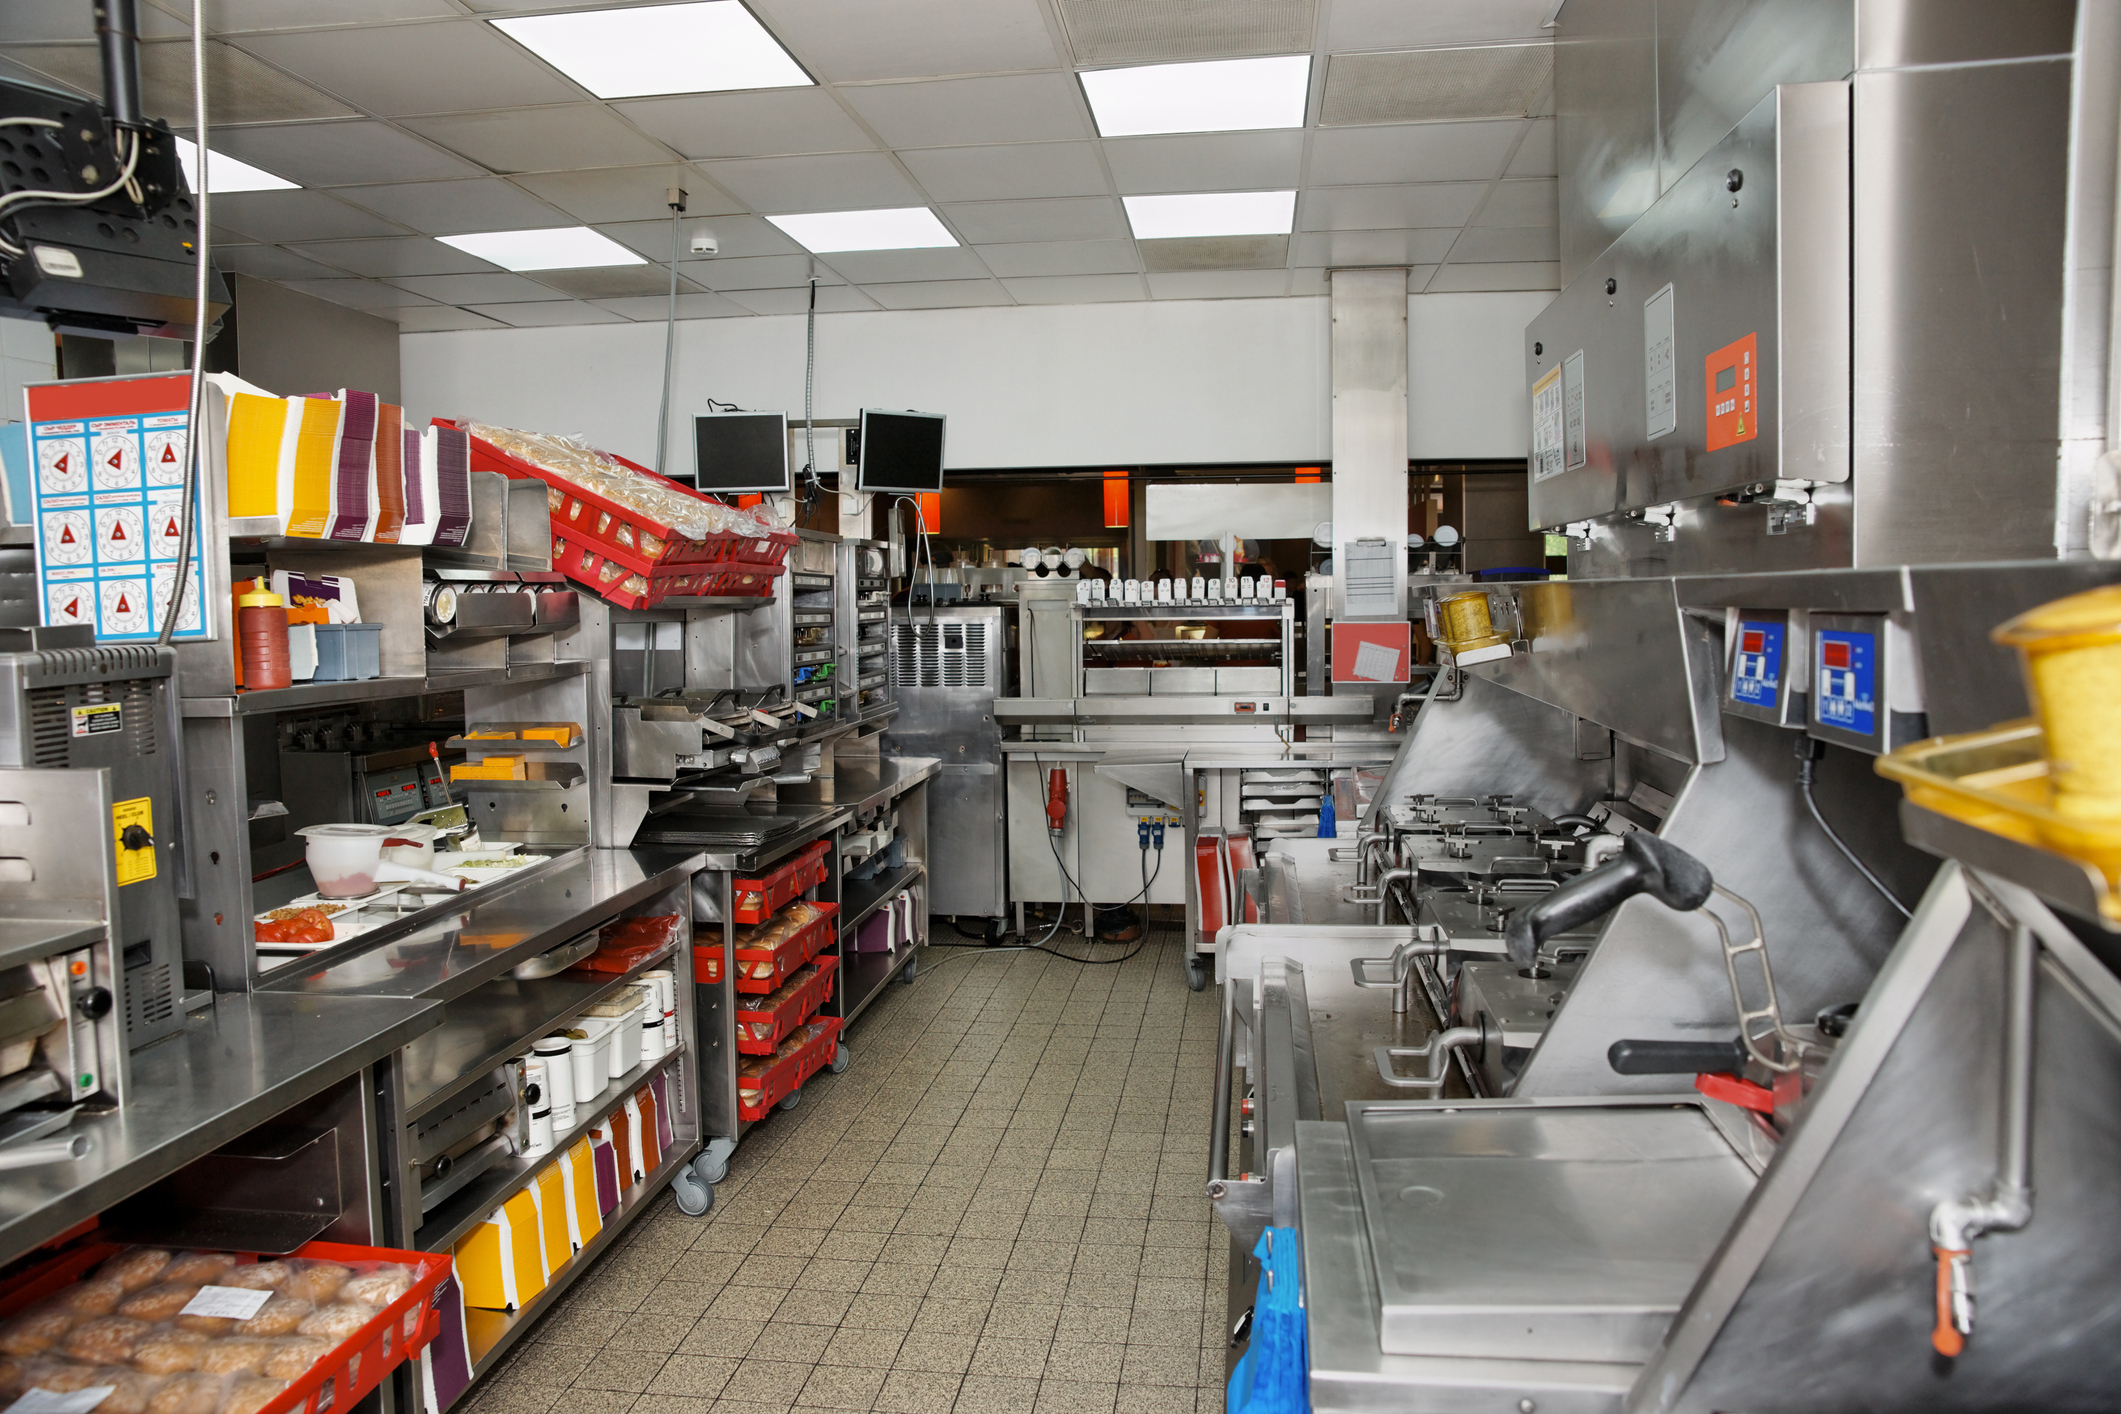 Interior of Culinary School with equipment ready to auction